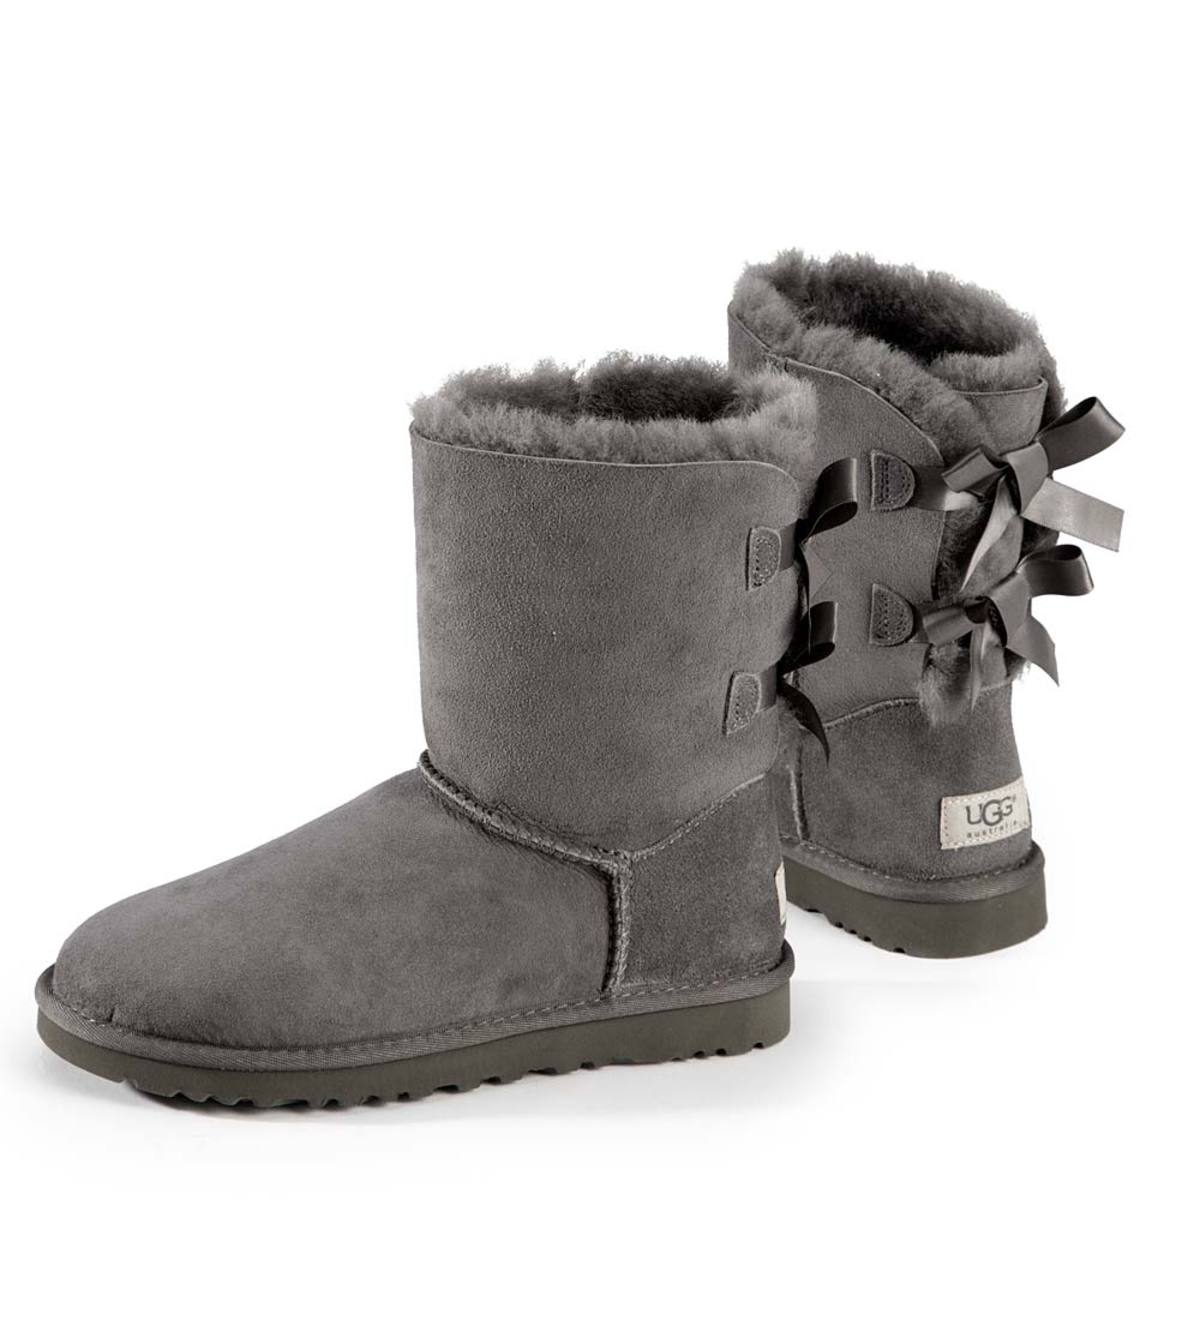 grey bow ugg boots